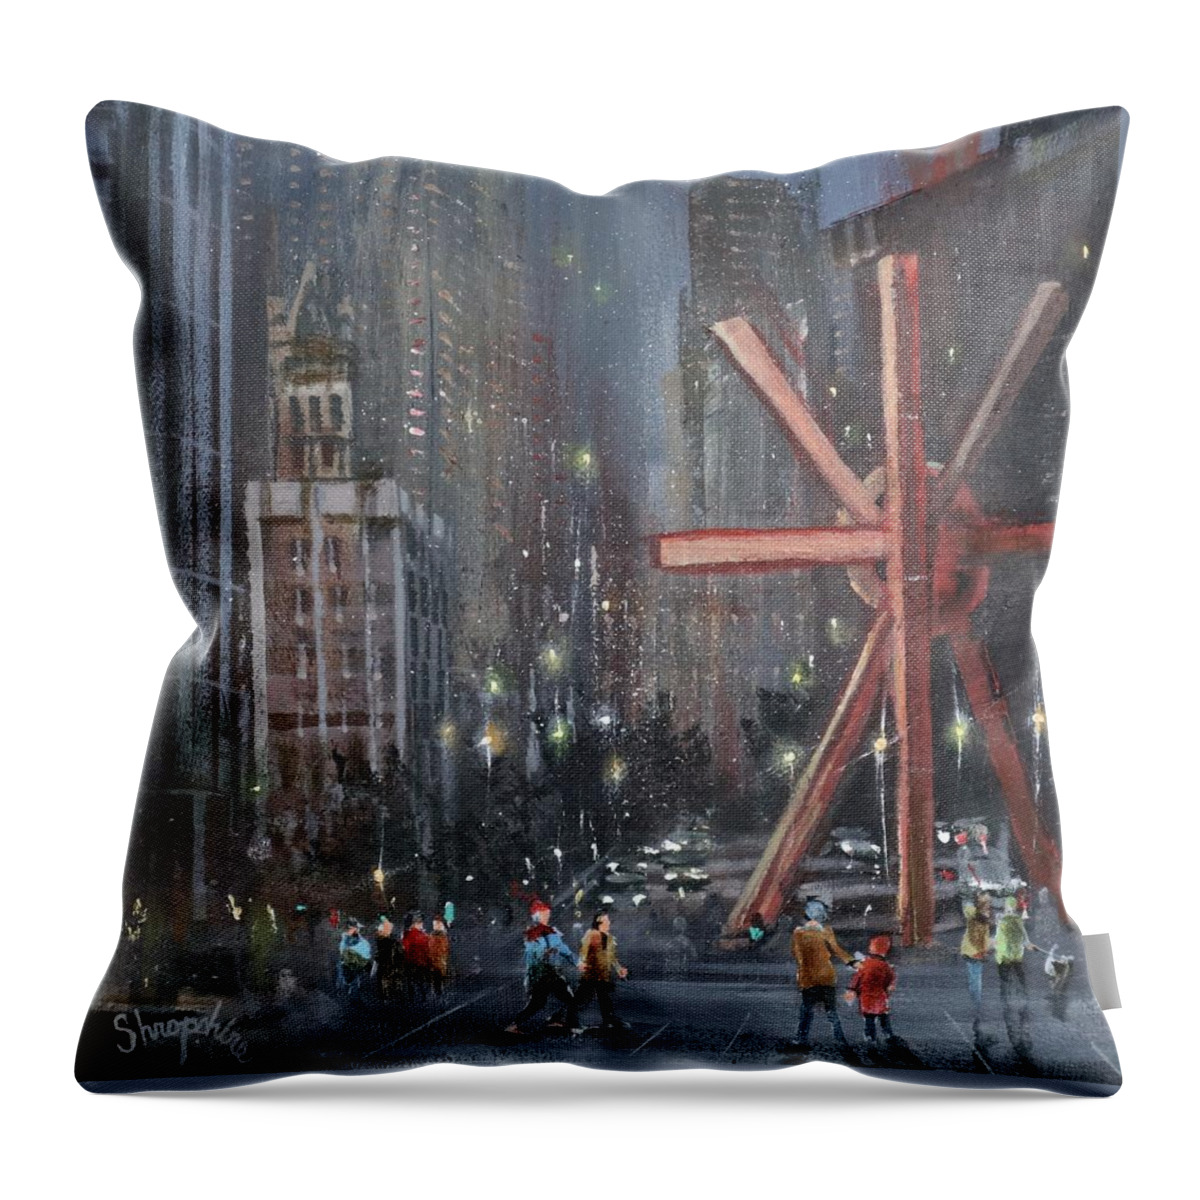 Milwaukee Throw Pillow featuring the painting Milwaukee Sculpture by Tom Shropshire